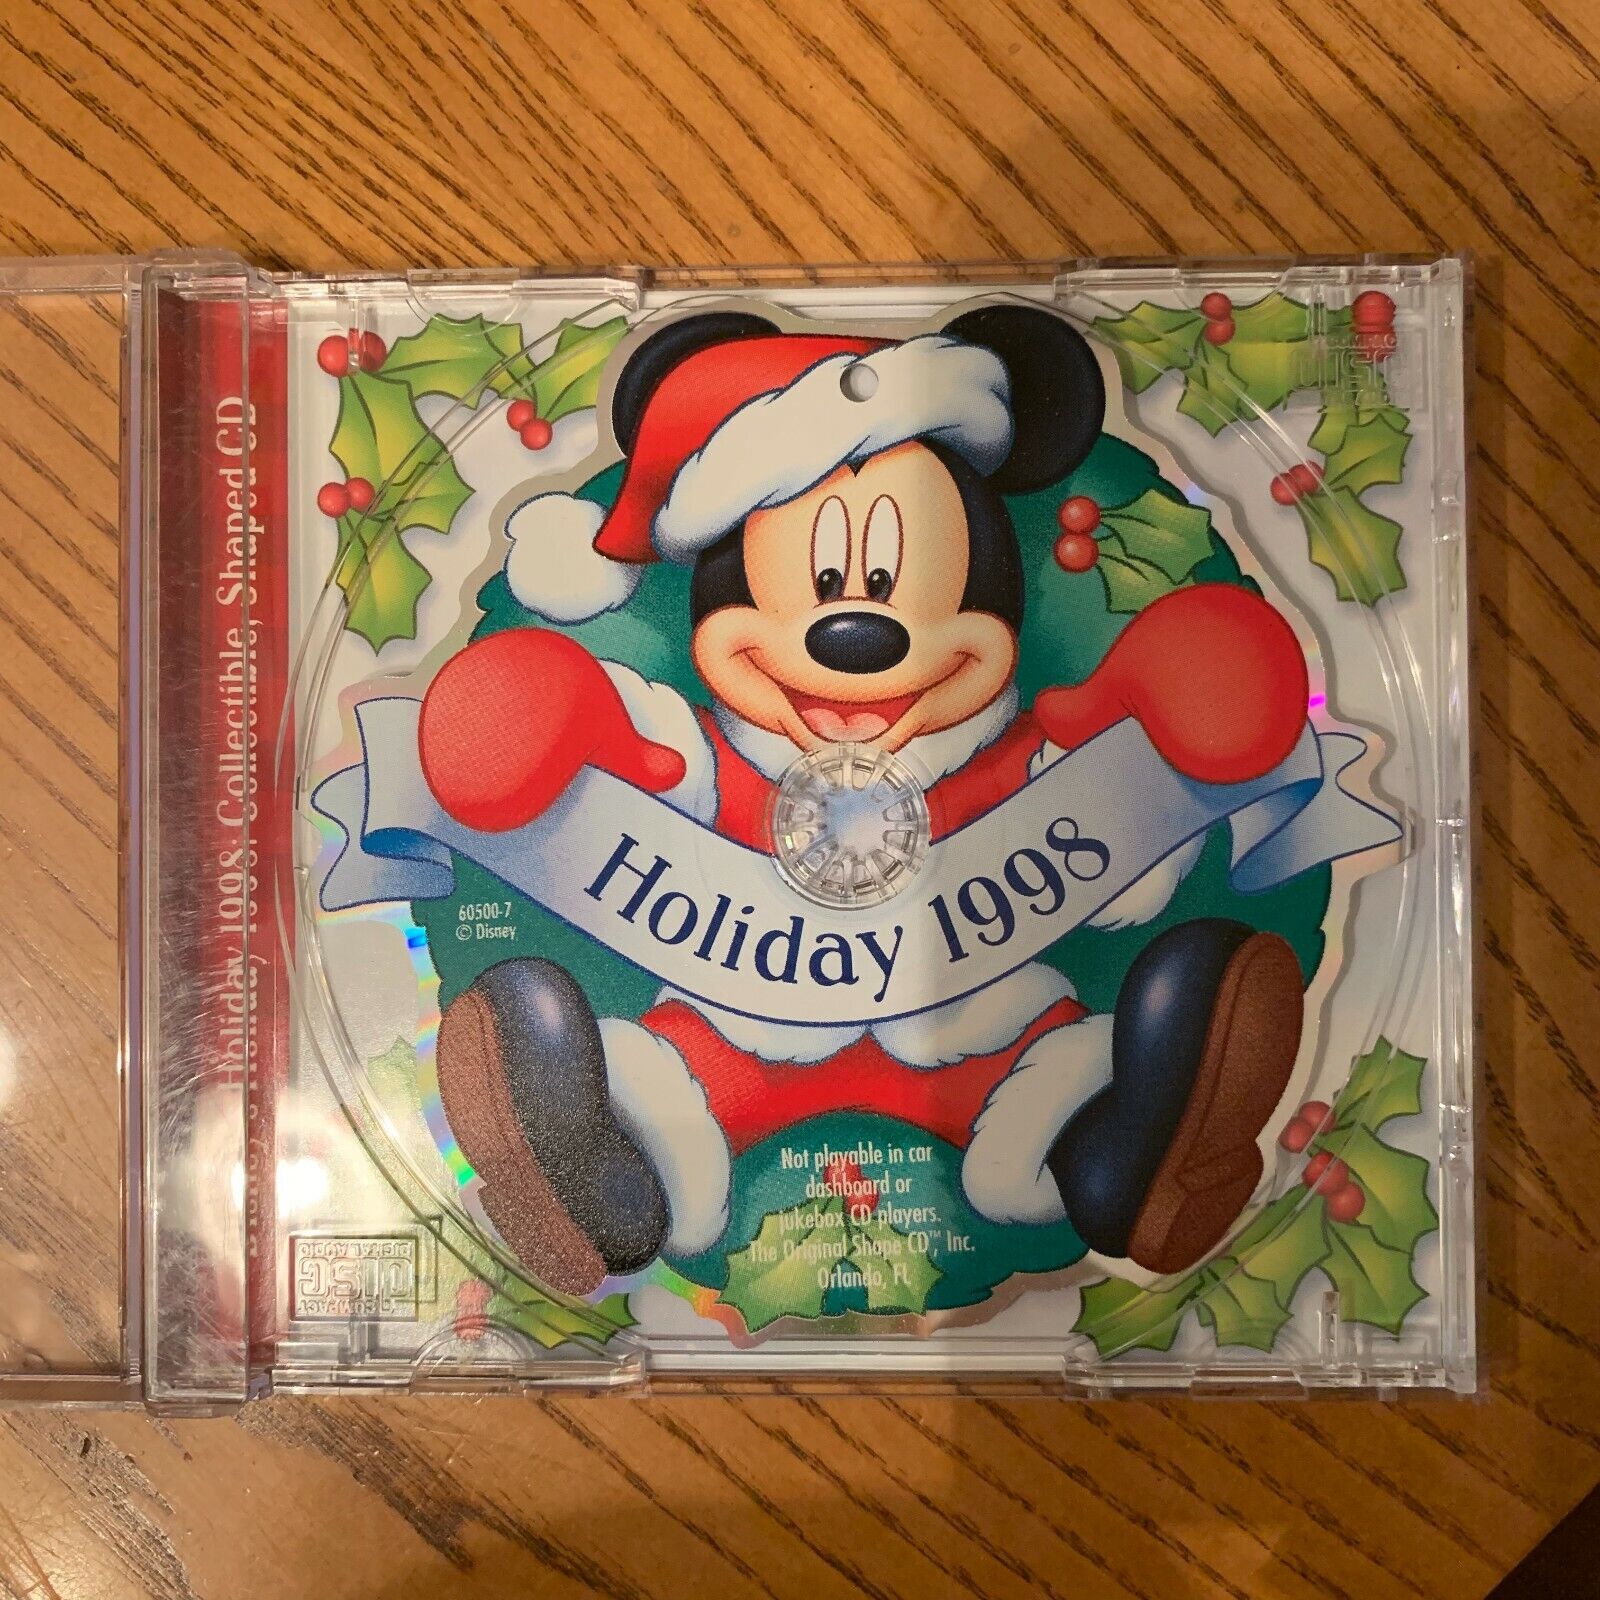  MICKEY MOUSE - DISNEY CHRISTMAS ORNAMENT COLLECTIBLE SHAPED CD - OG 1998